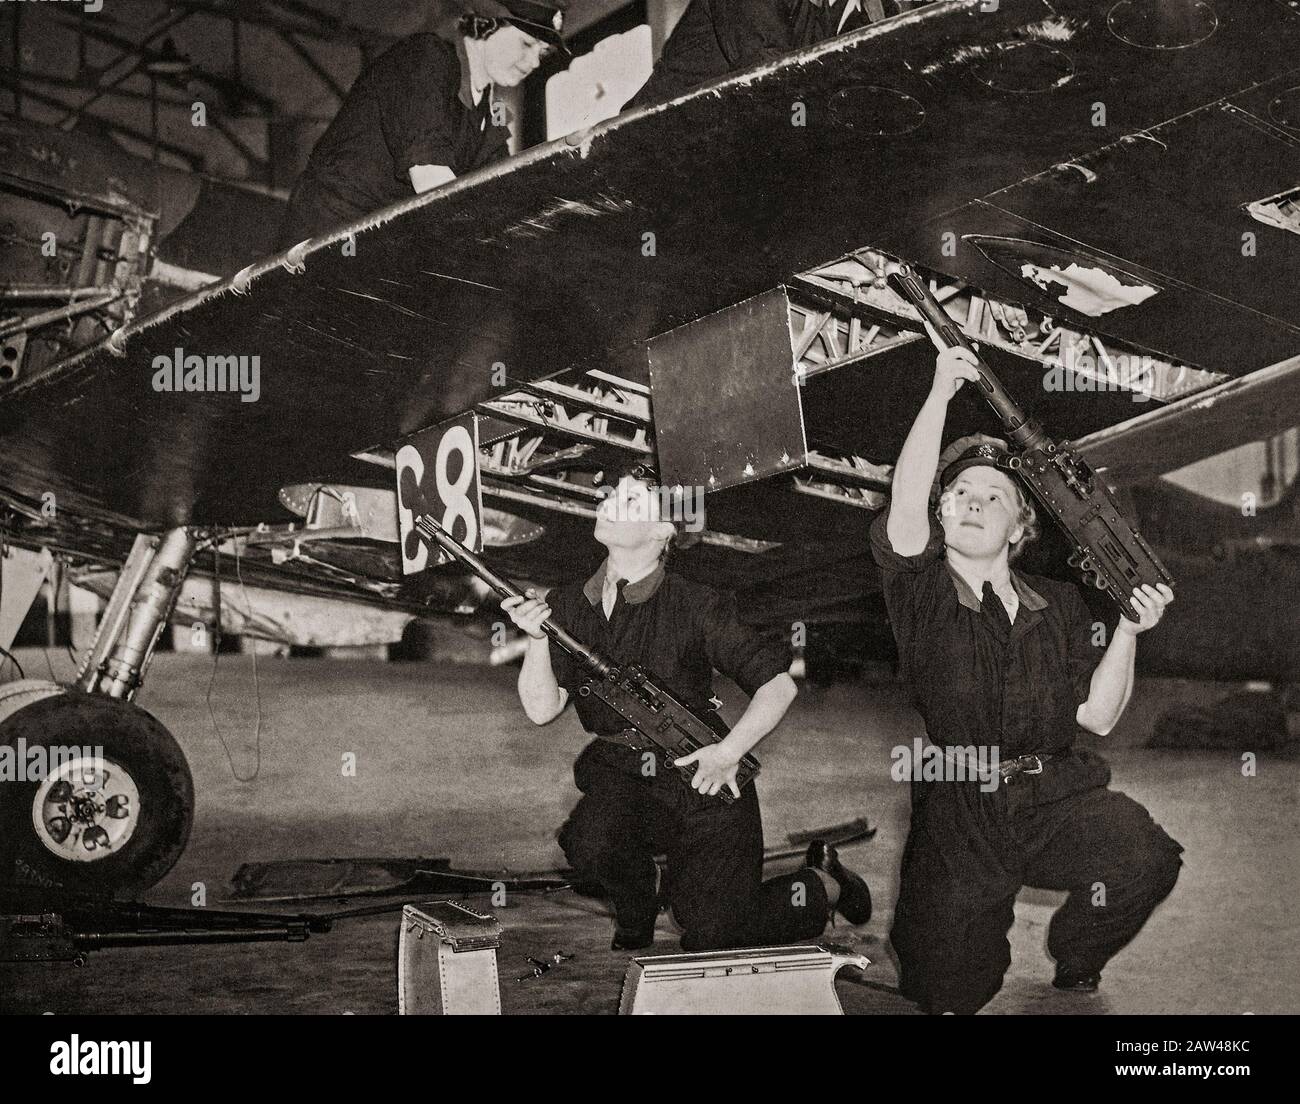 Armourers of the WAAF installing Browning .303 inch Machine Guns in a Supermarine Spitfire. The WAAF (Women's Auxiliary Air Force) was created on 28 June 1939,  and women recruited into the WAAF were given basic training. WAAFs did not serve as aircrew, but were active in parachute packing and the crewing of barrage balloons in addition to performing catering, meteorology, radar, aircraft maintenance, transport, communications duties including wireless telephonic and telegraphic operation. Stock Photo